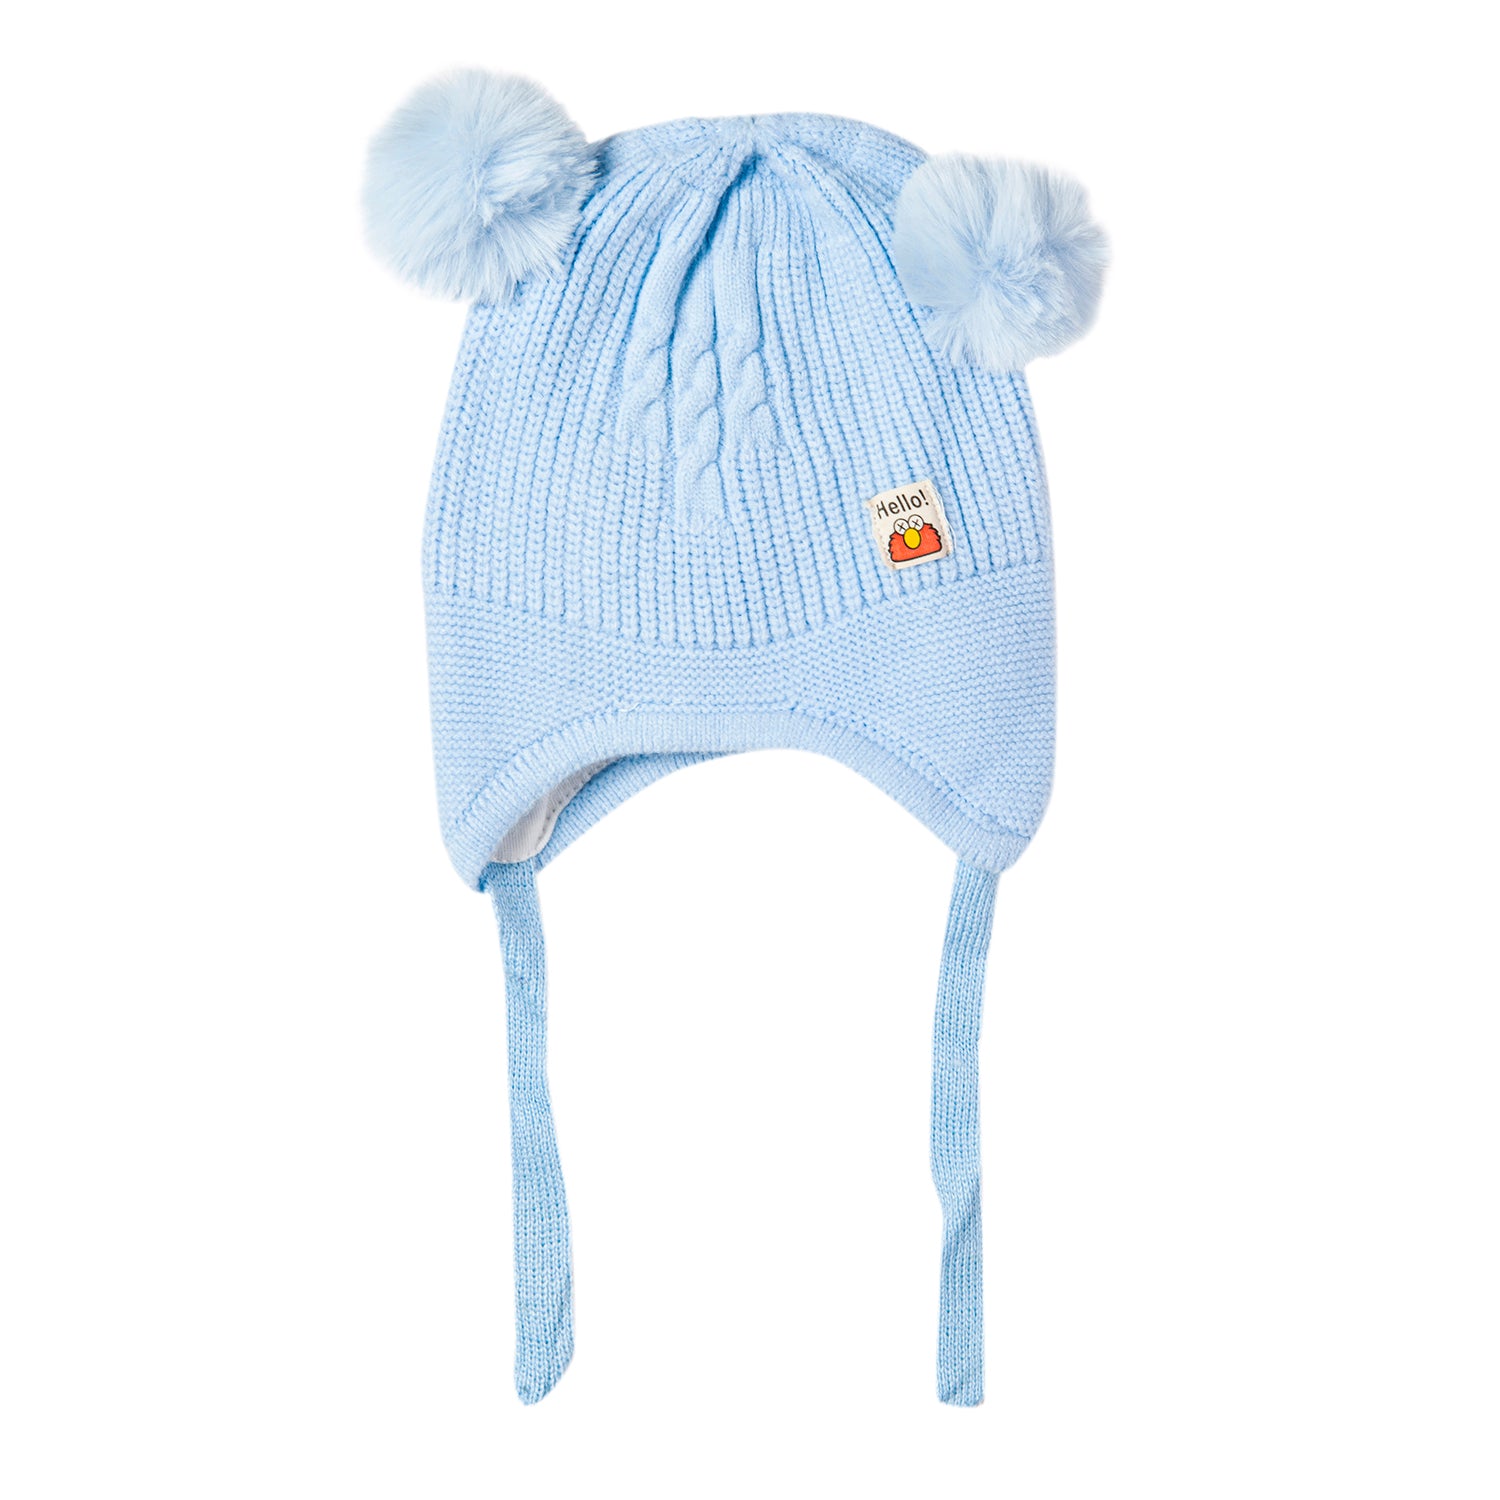 Baby Moo Knit Woollen Cap With Tie Knot For Ear Protection Solid Blue